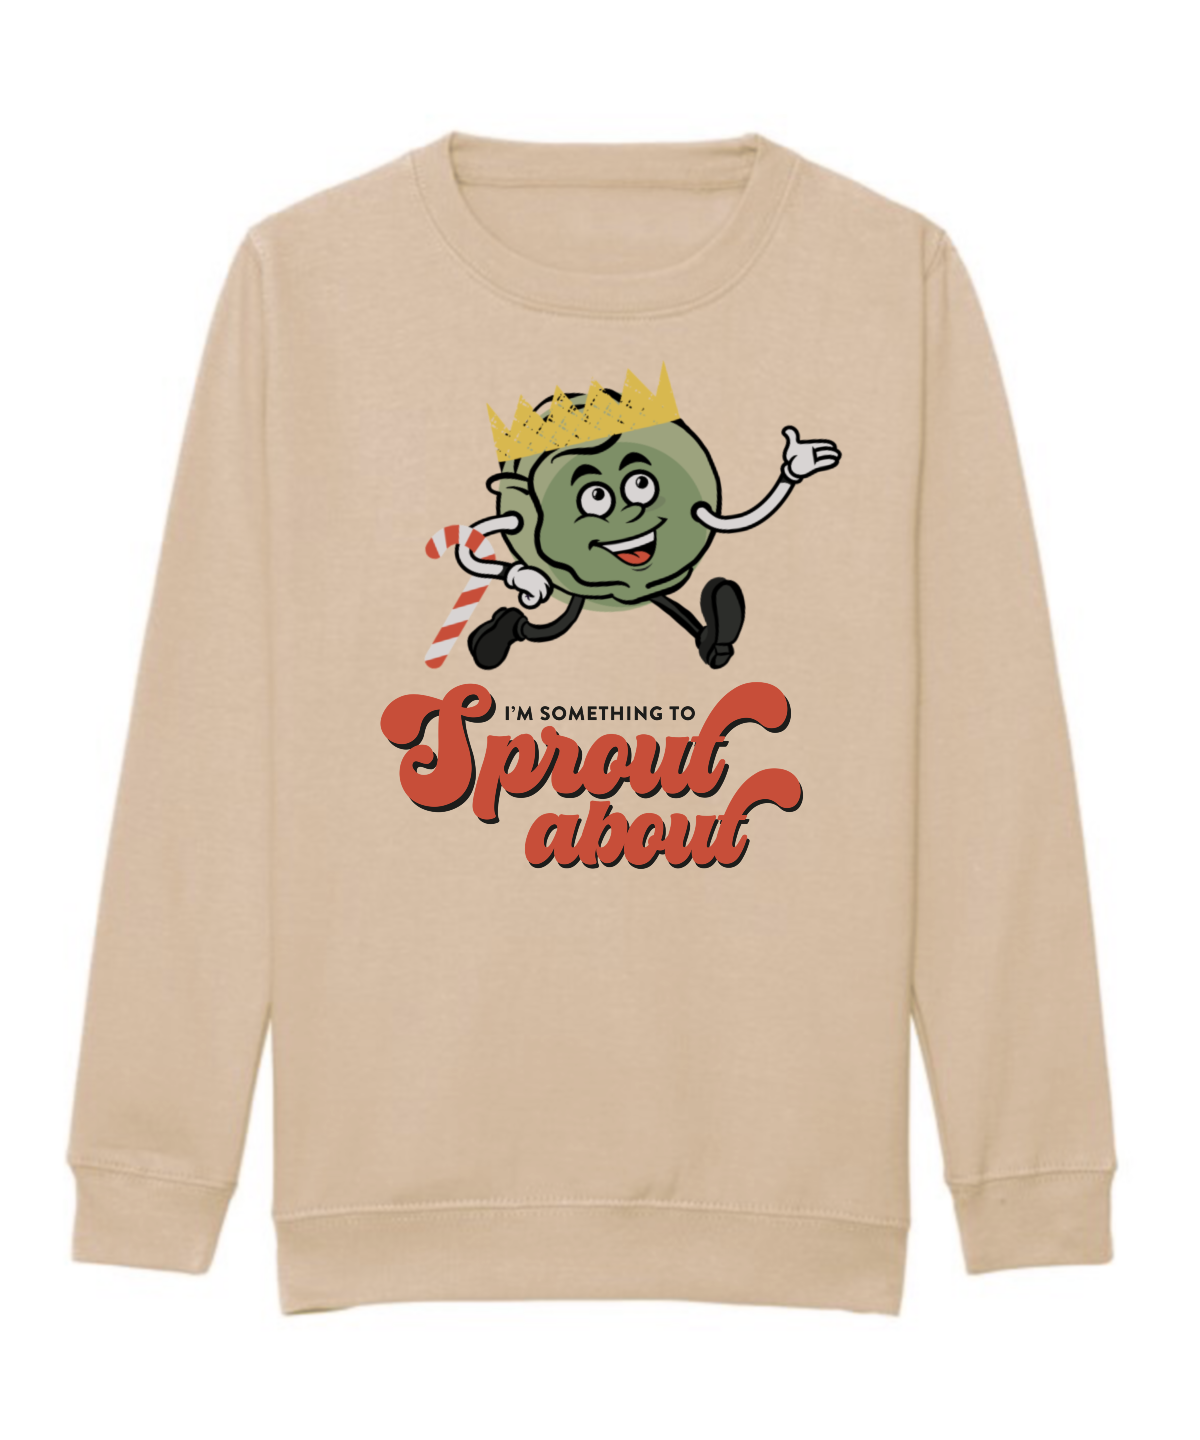 Sprout About Kids Christmas Sweatshirt in Natural